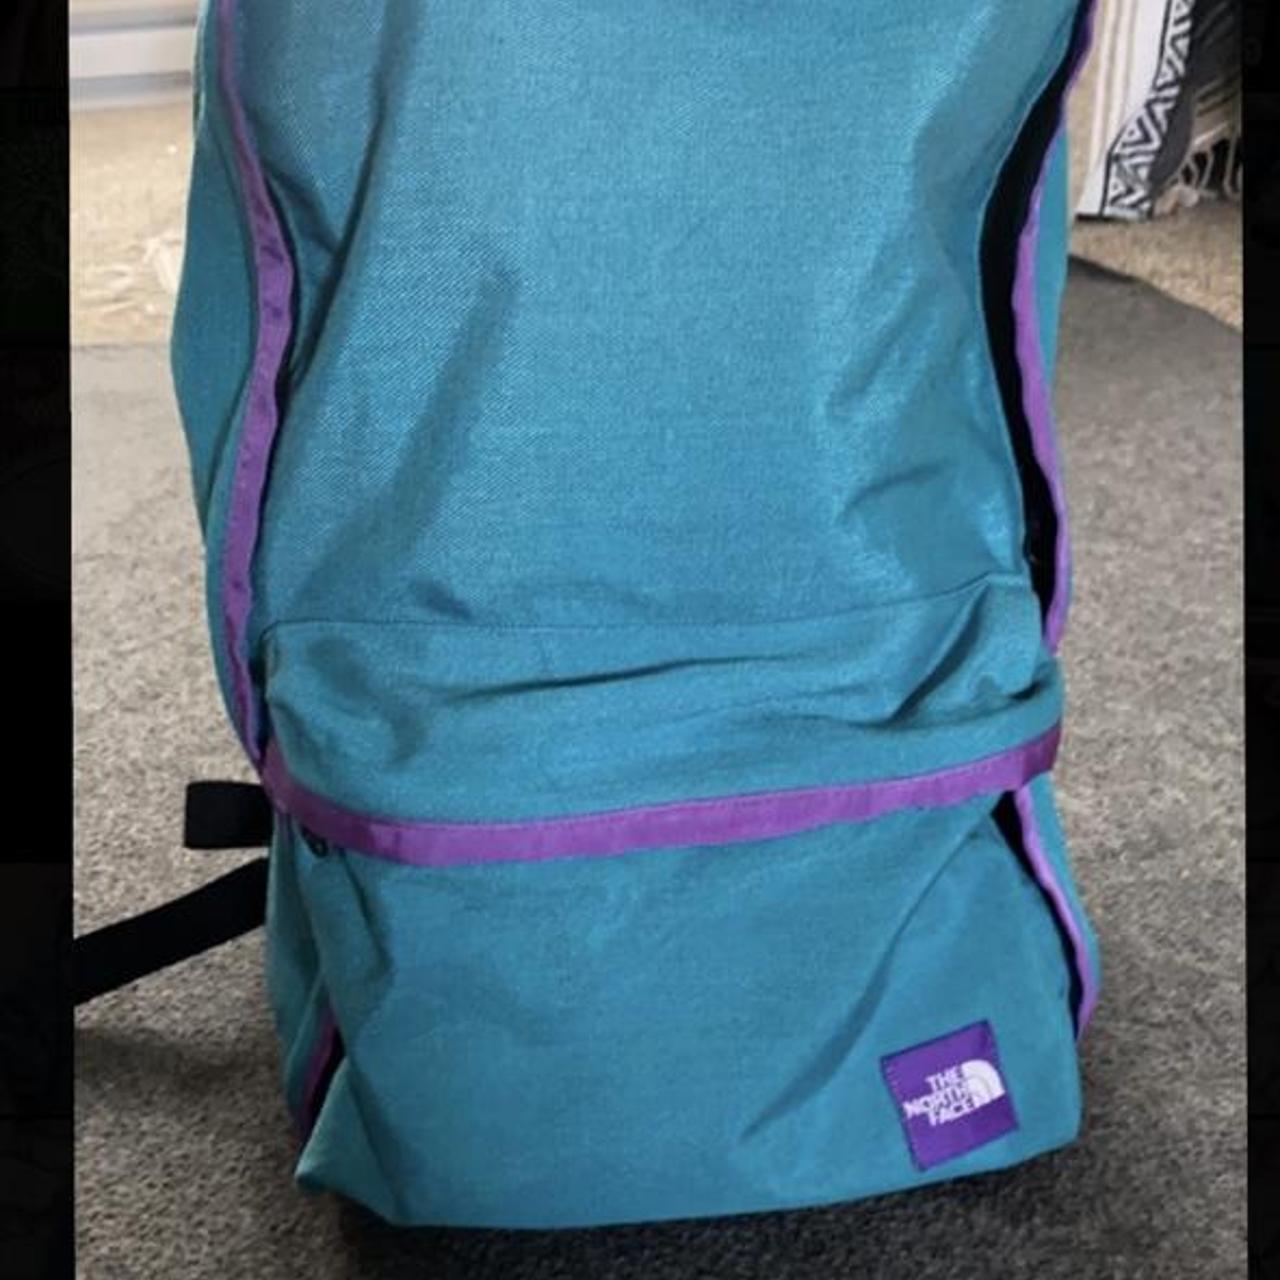 The North Face Purple Label Women's Purple and Blue Bag (4)